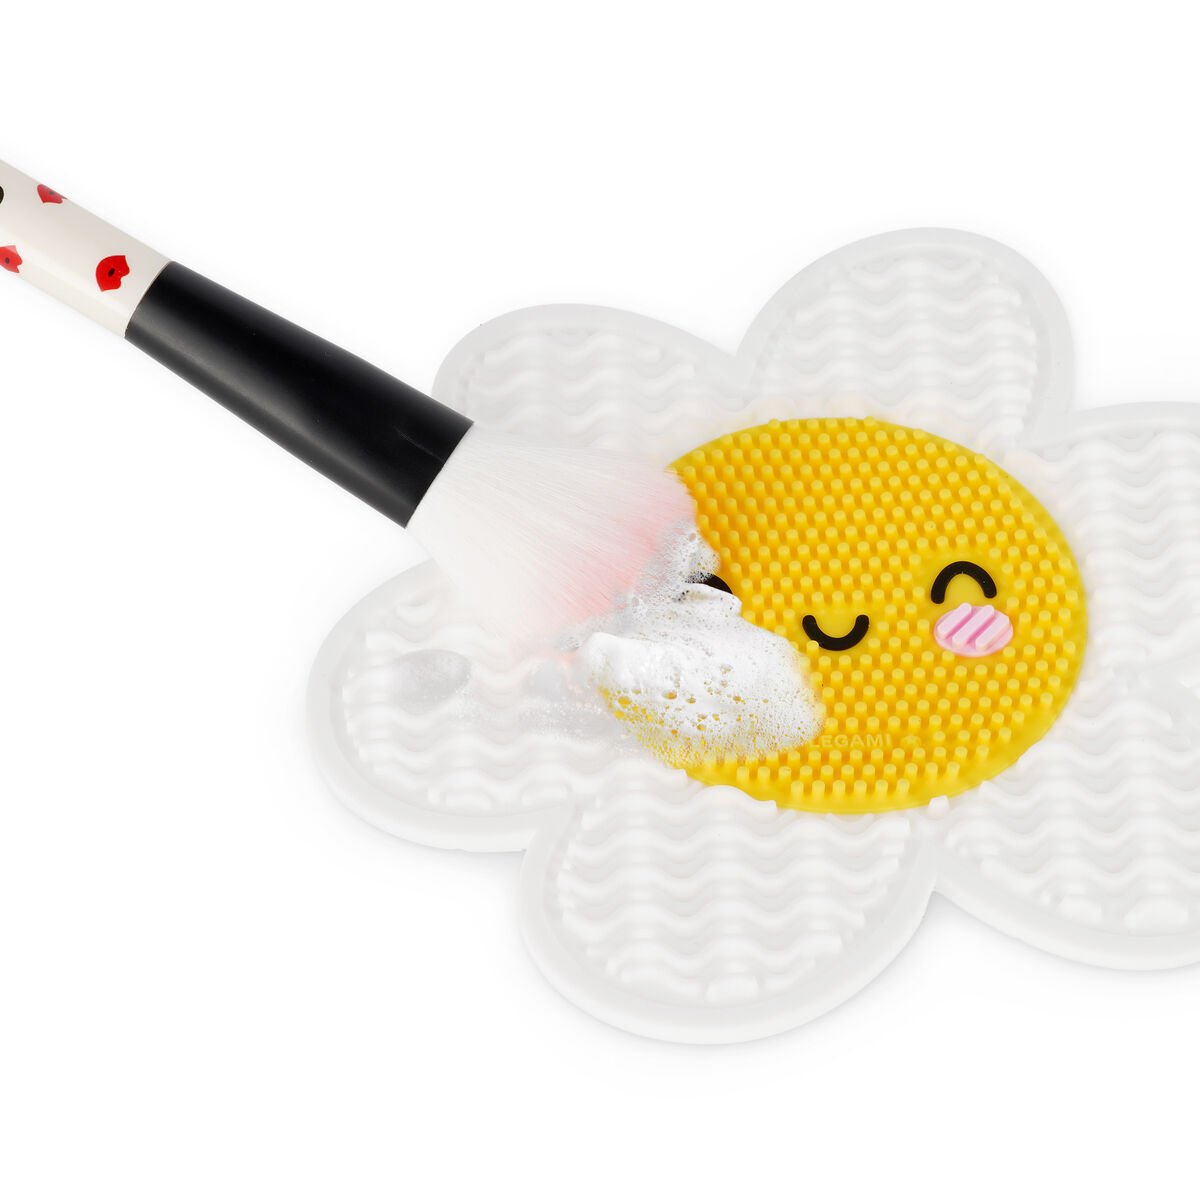 Makeup Brush Cleaning Mat - Brush it Off!, , zoo